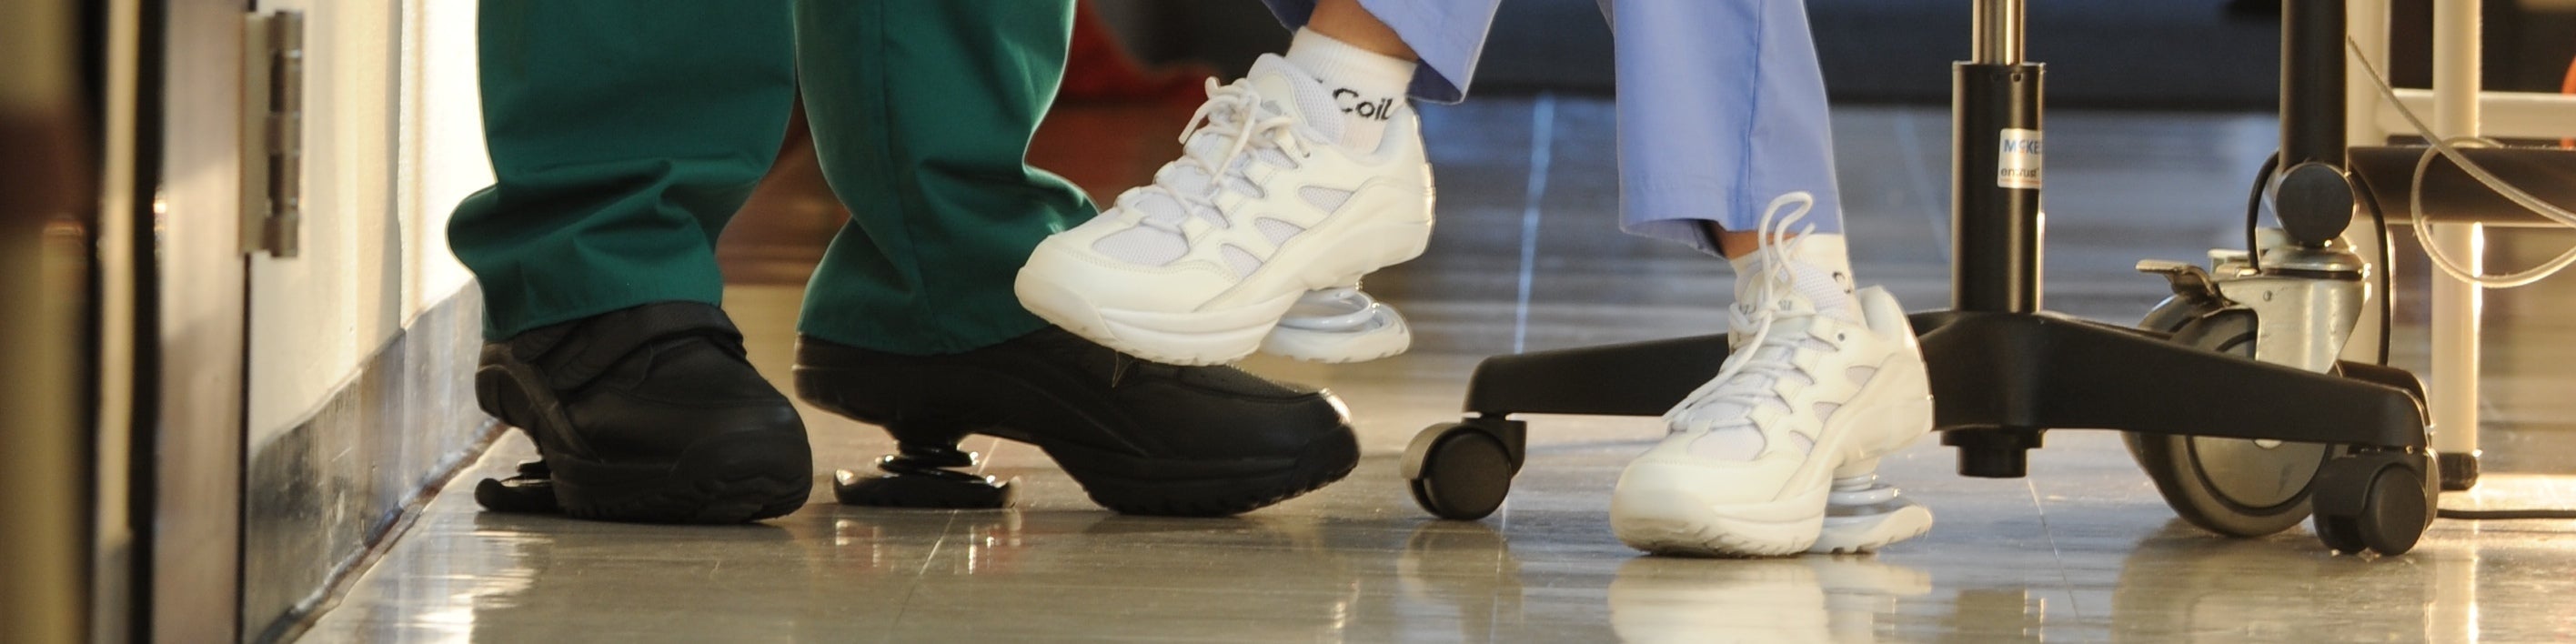 Z-CoiL Nurses & Doctors Using Z-CoiLs to Get Through Long Shifts Pain Relief Orthotic Shoes